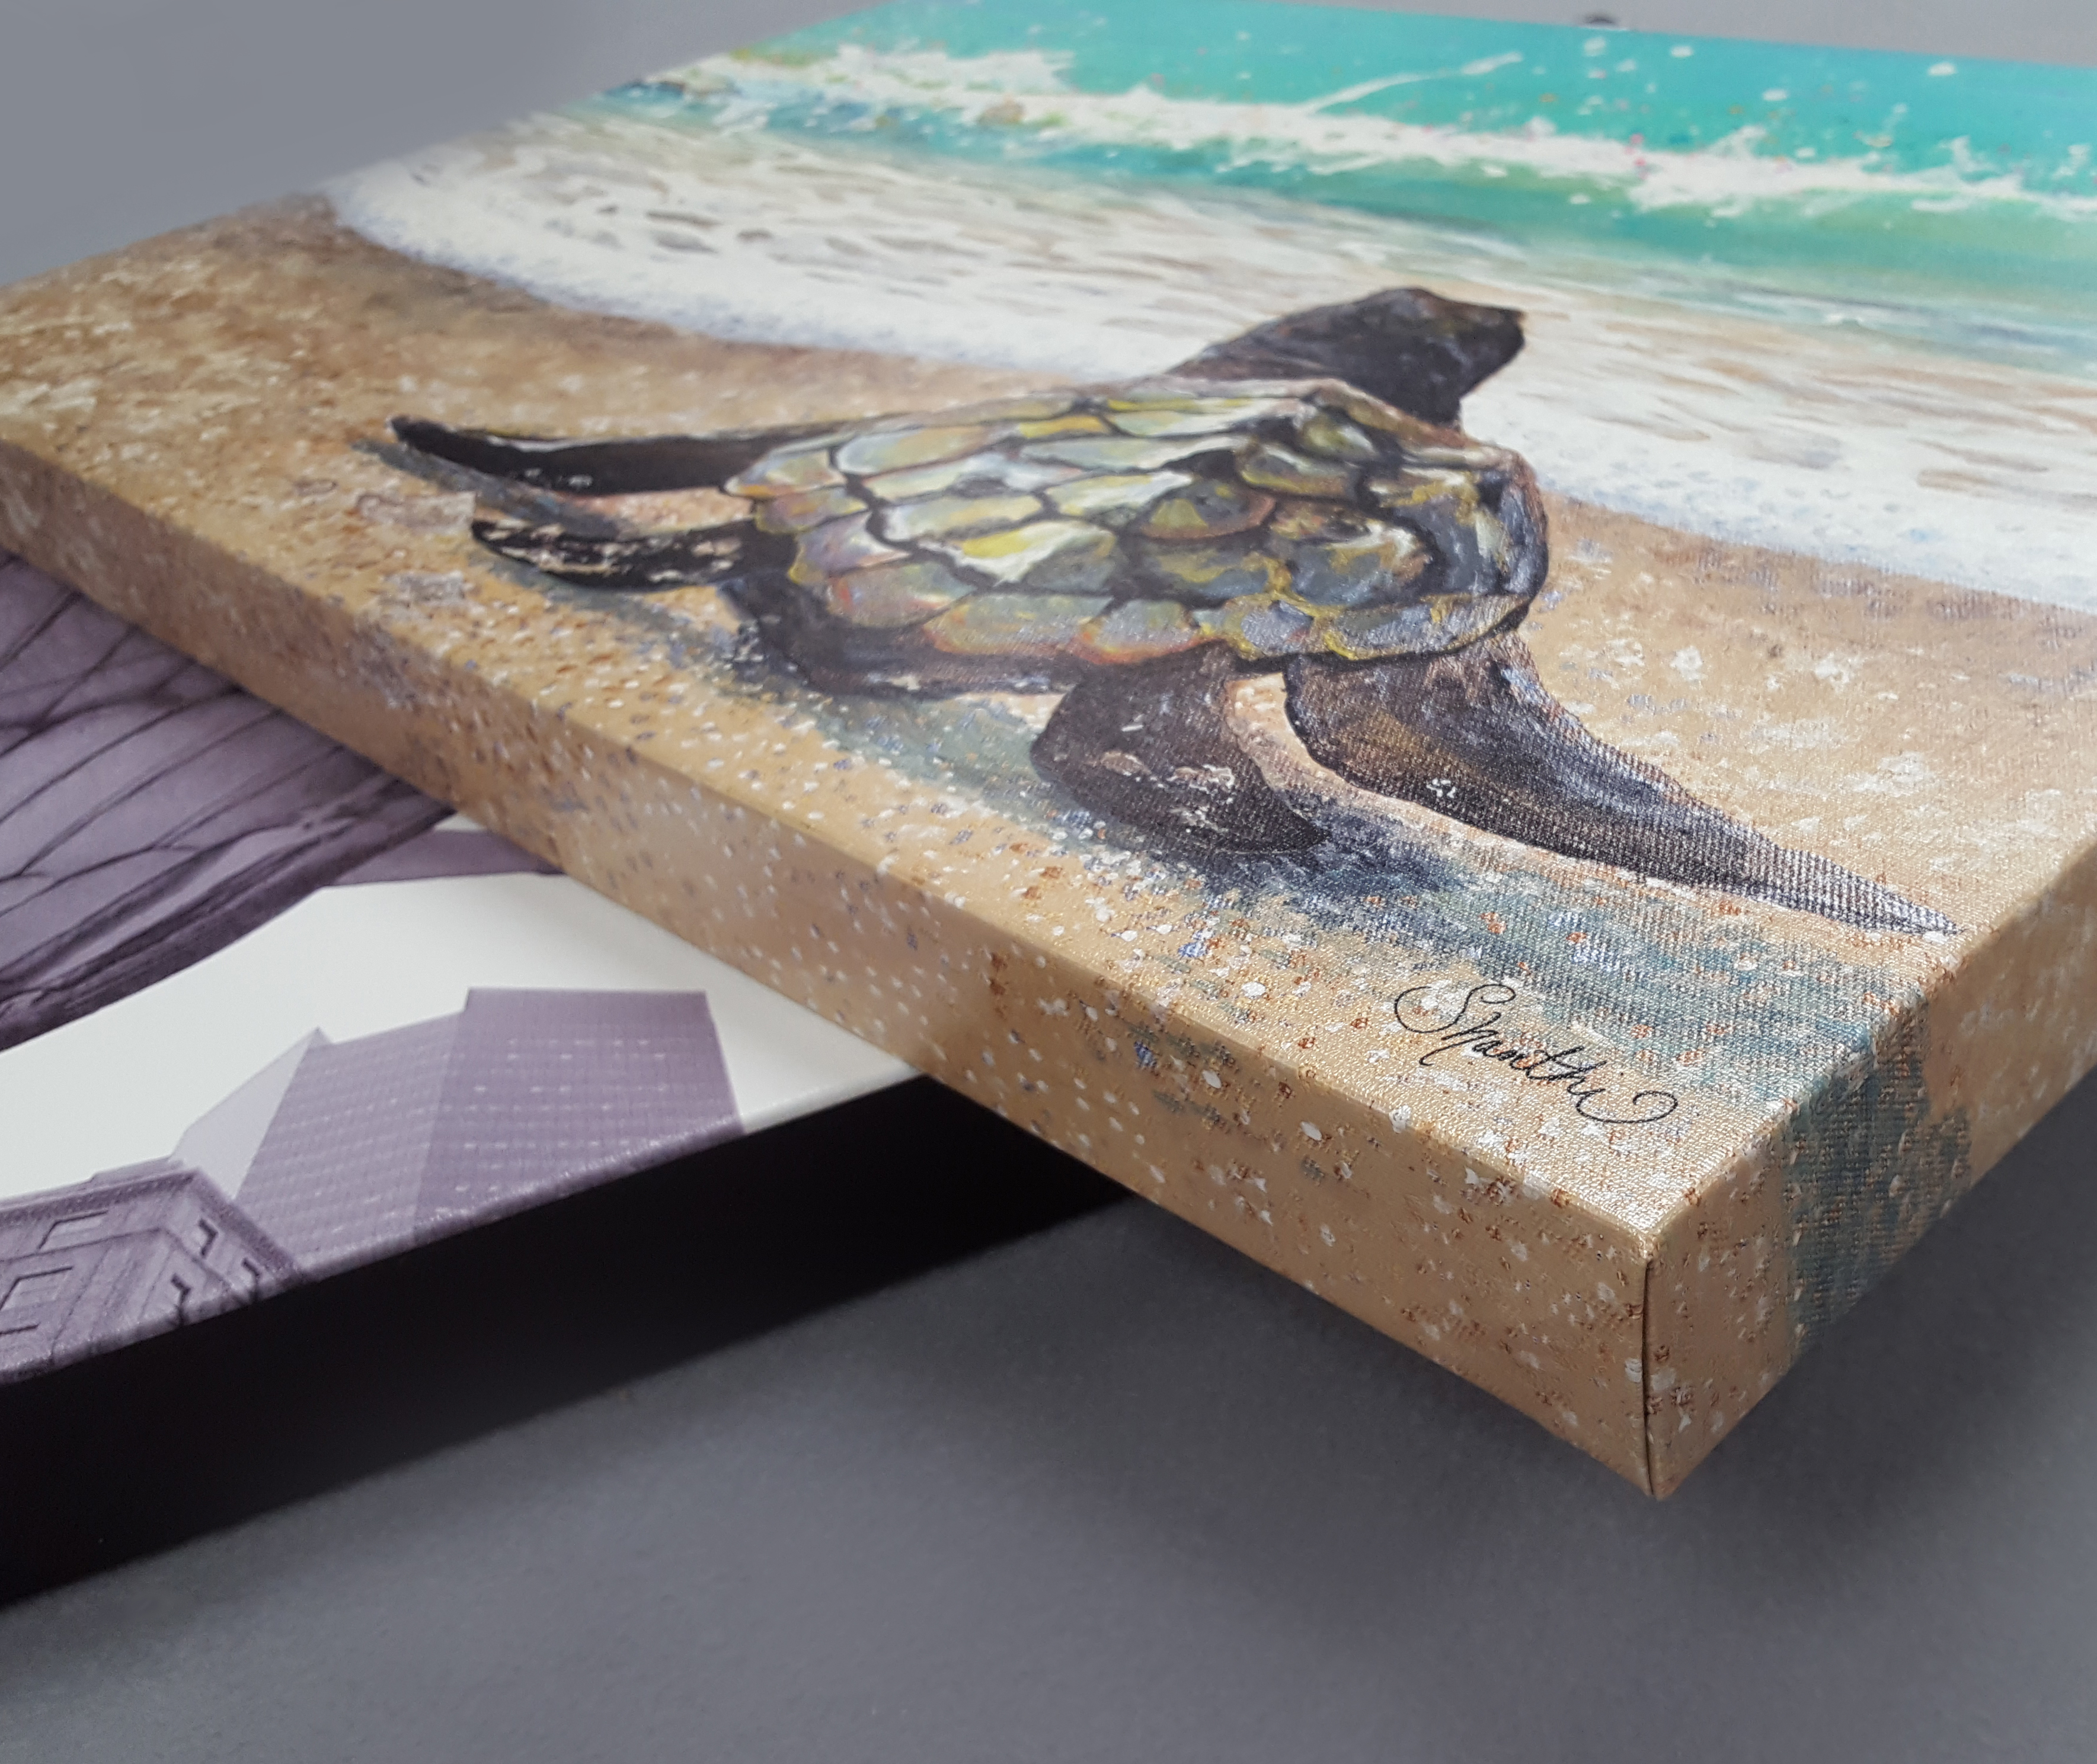 Details about   A stunning Ltd Edition Custom Canvas Giclee measures 20"x30" by Maria Sharylen 